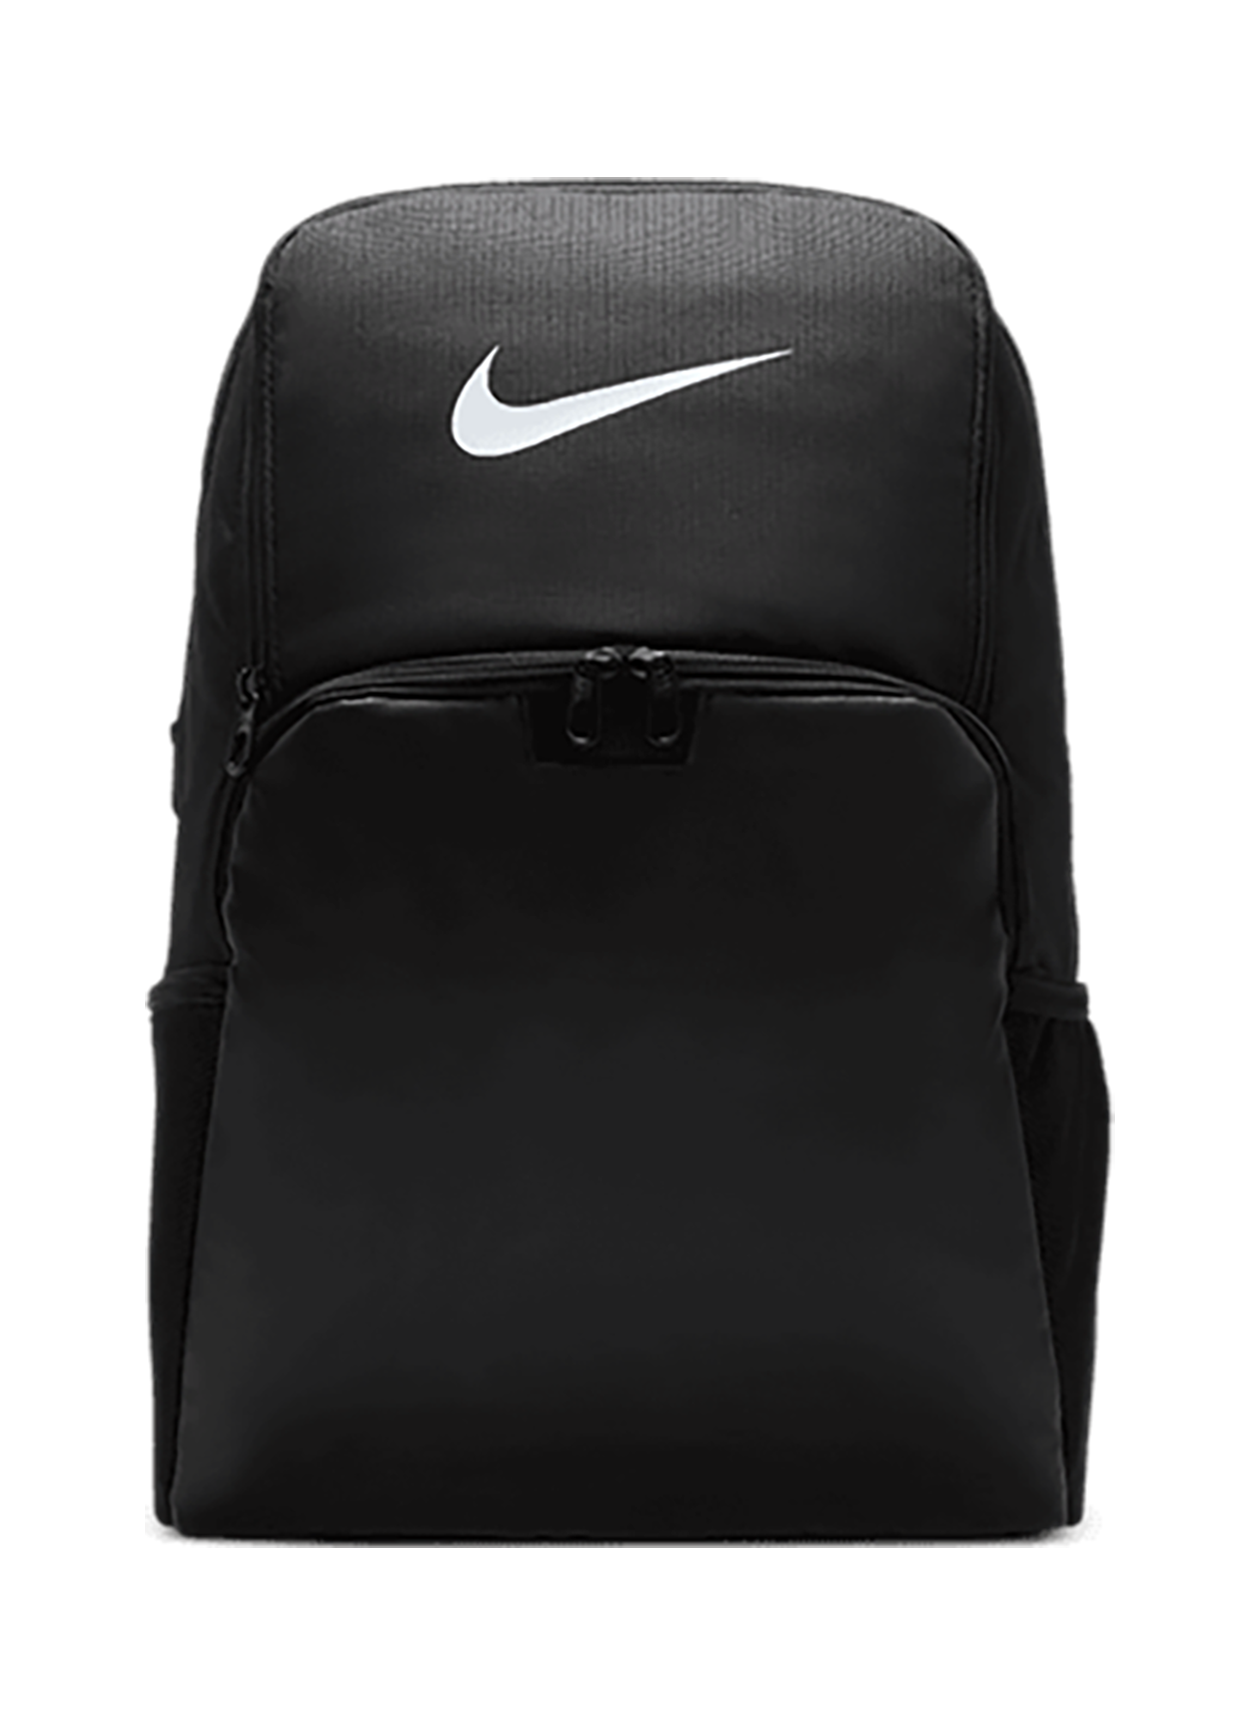 Nike Hayward 2.0 Backpack, Nike Backpack for Women and Men with Polyes–  backpacks4less.com